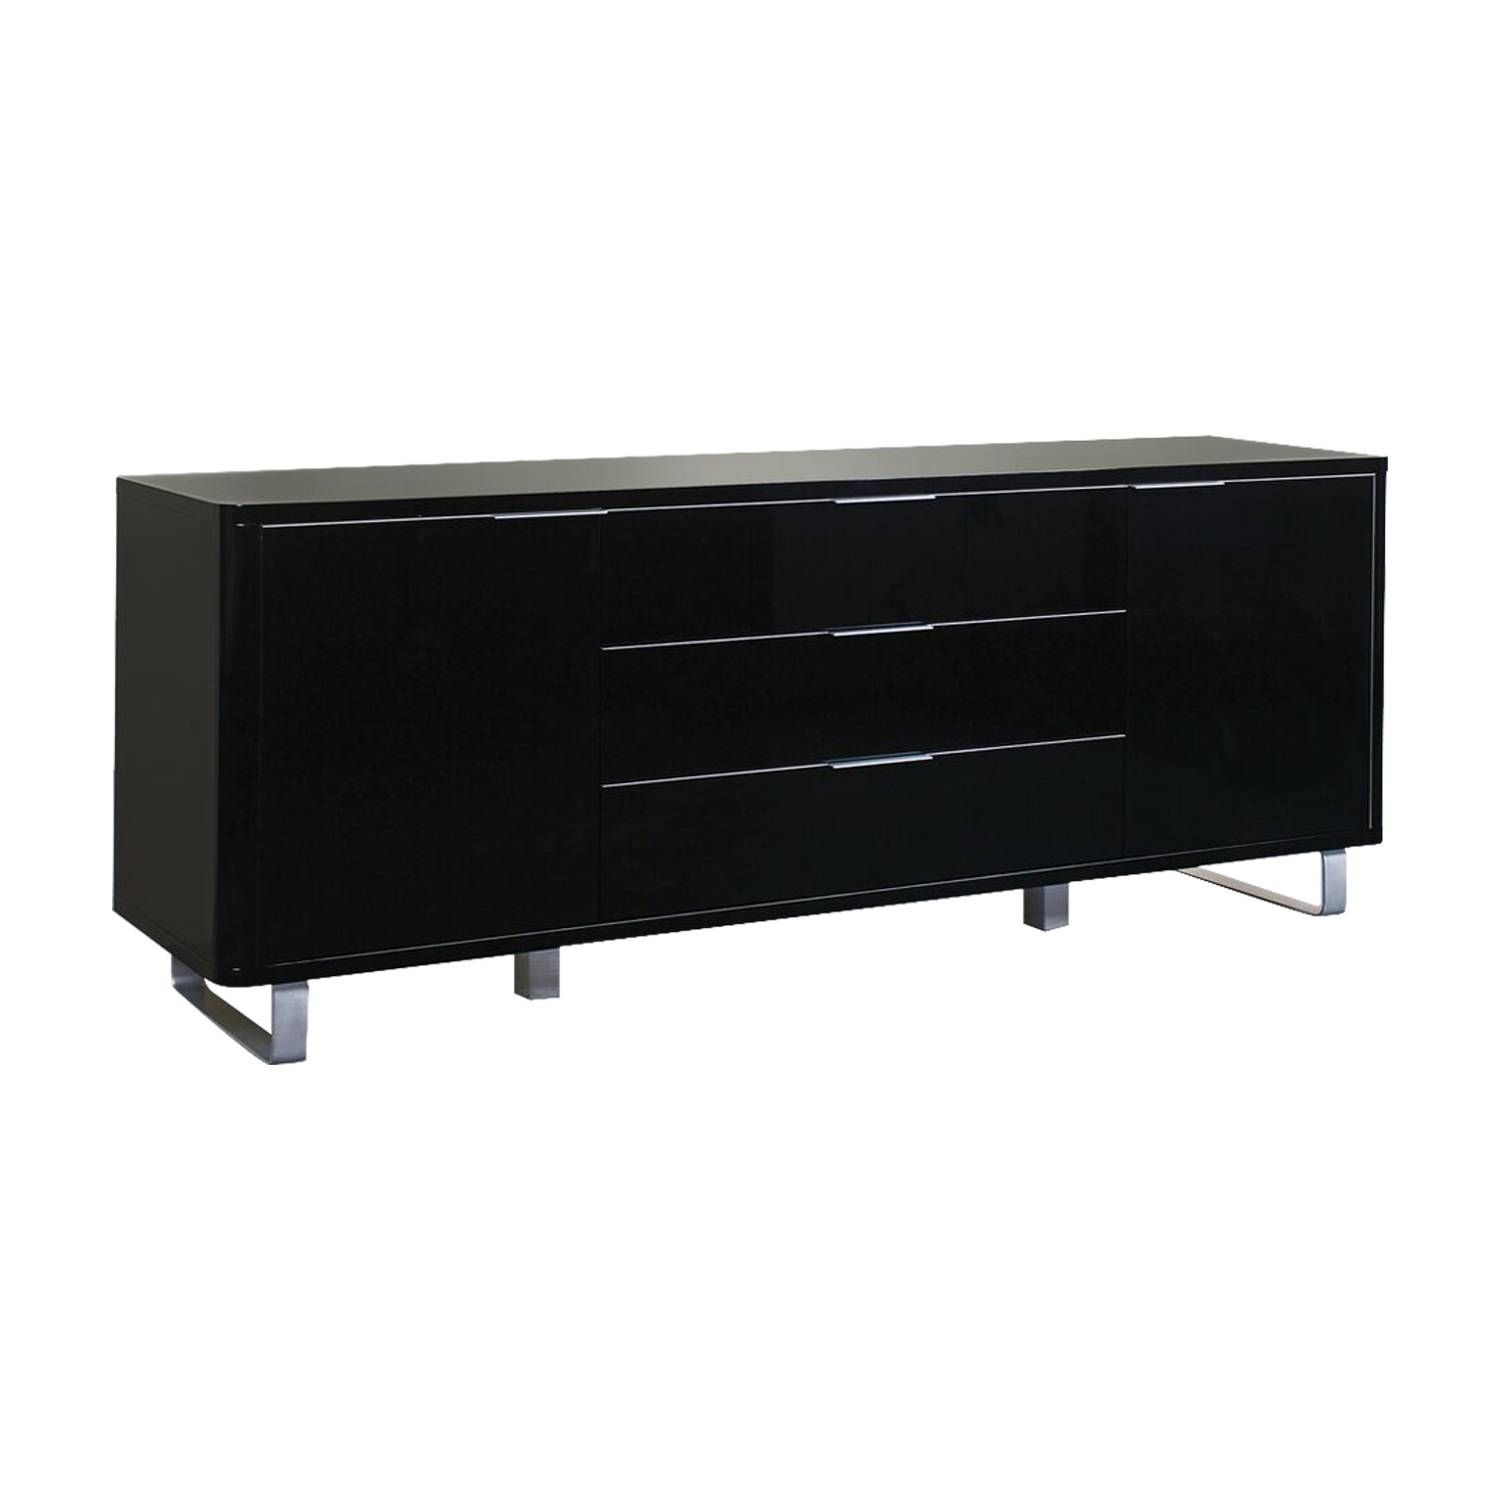 Accent Black High Gloss Sideboard | Modern Dining Furniture | Fads Inside Black Gloss Sideboards (View 5 of 15)